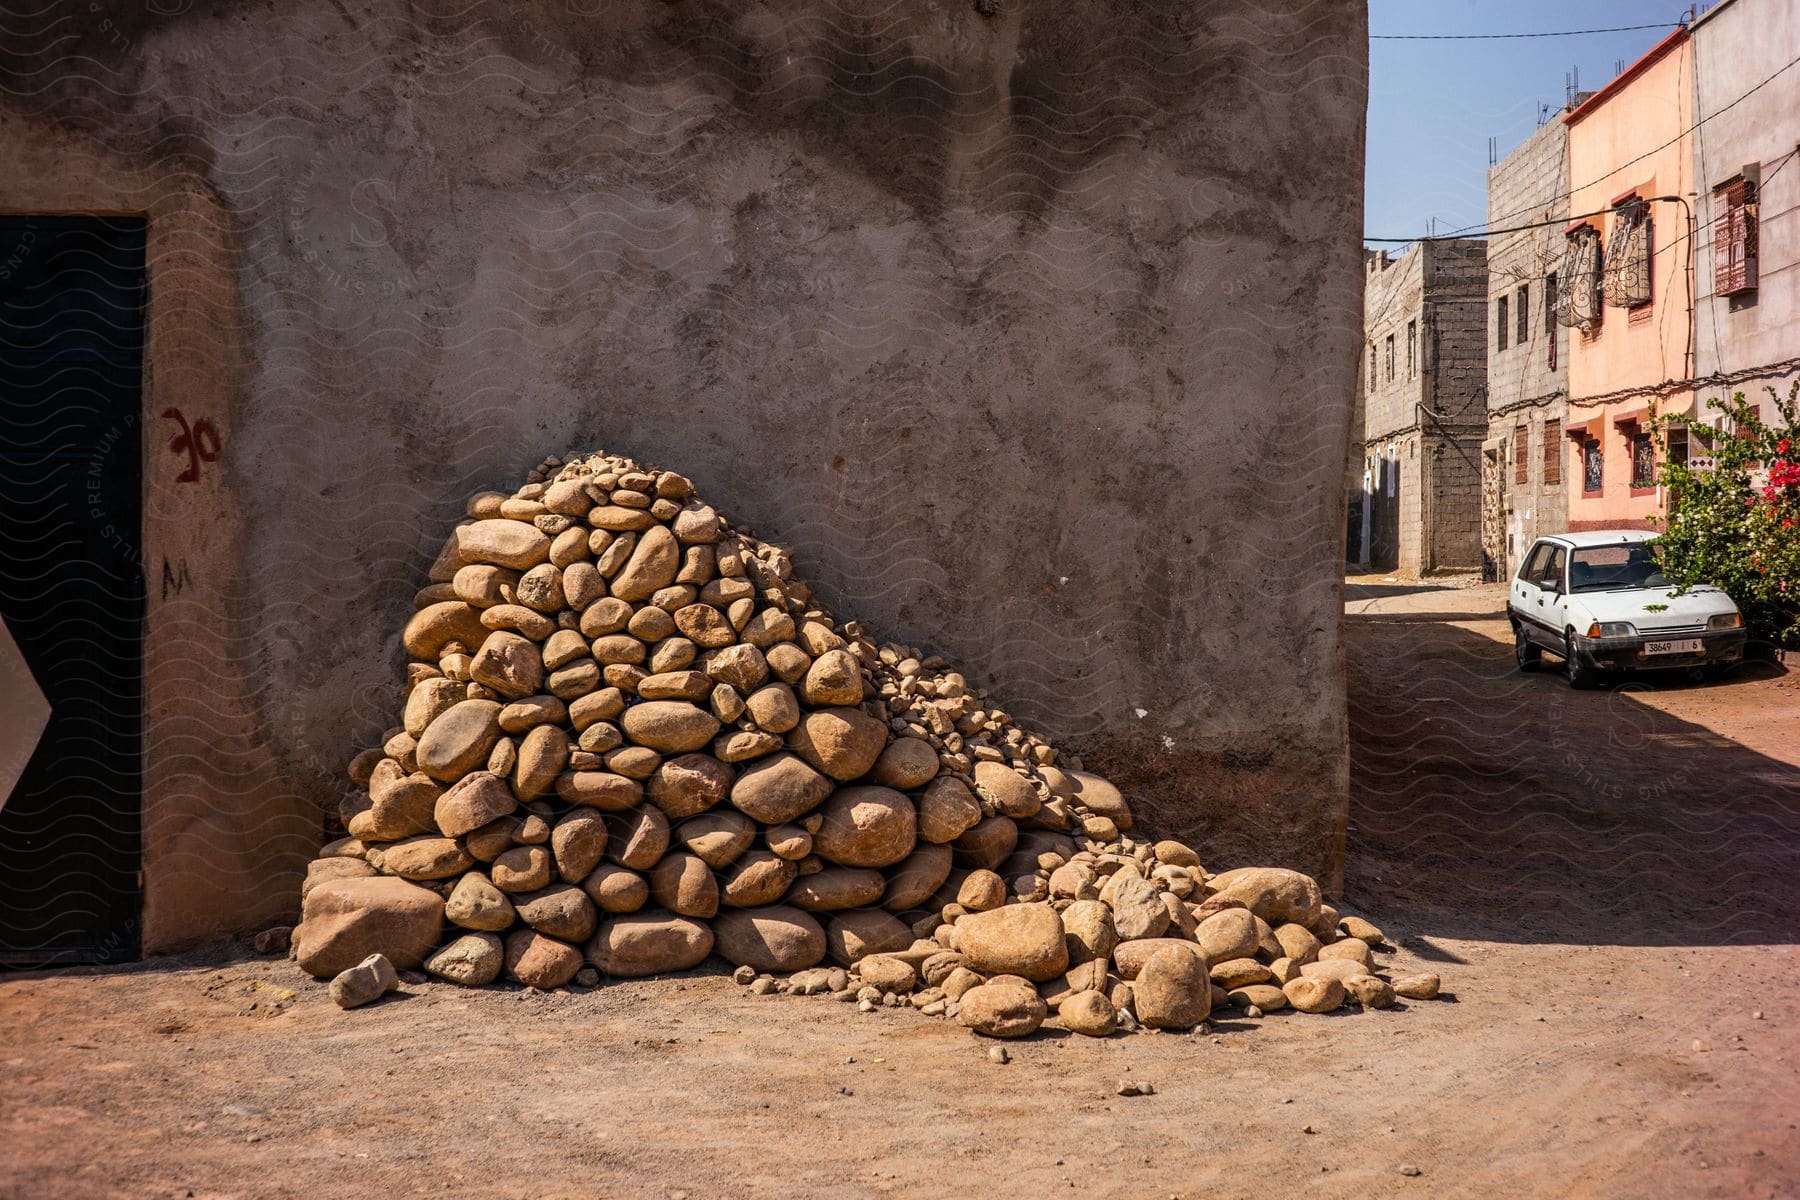 A pile of rocks supporting a dilapidated houses cementgray wall